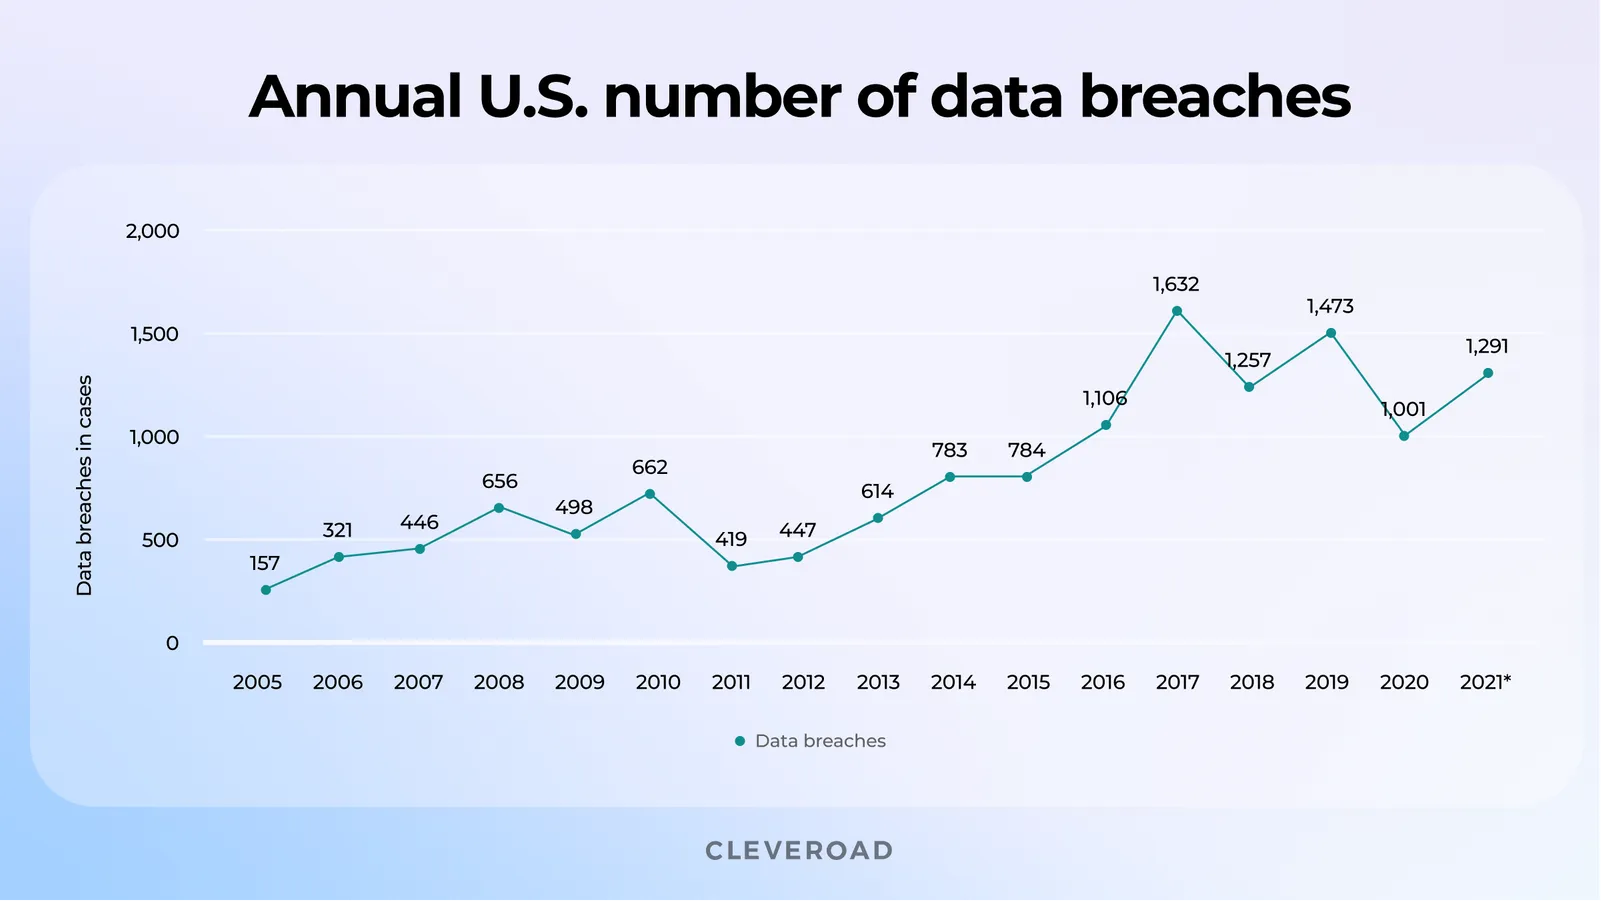 Number of data breaches in 2021